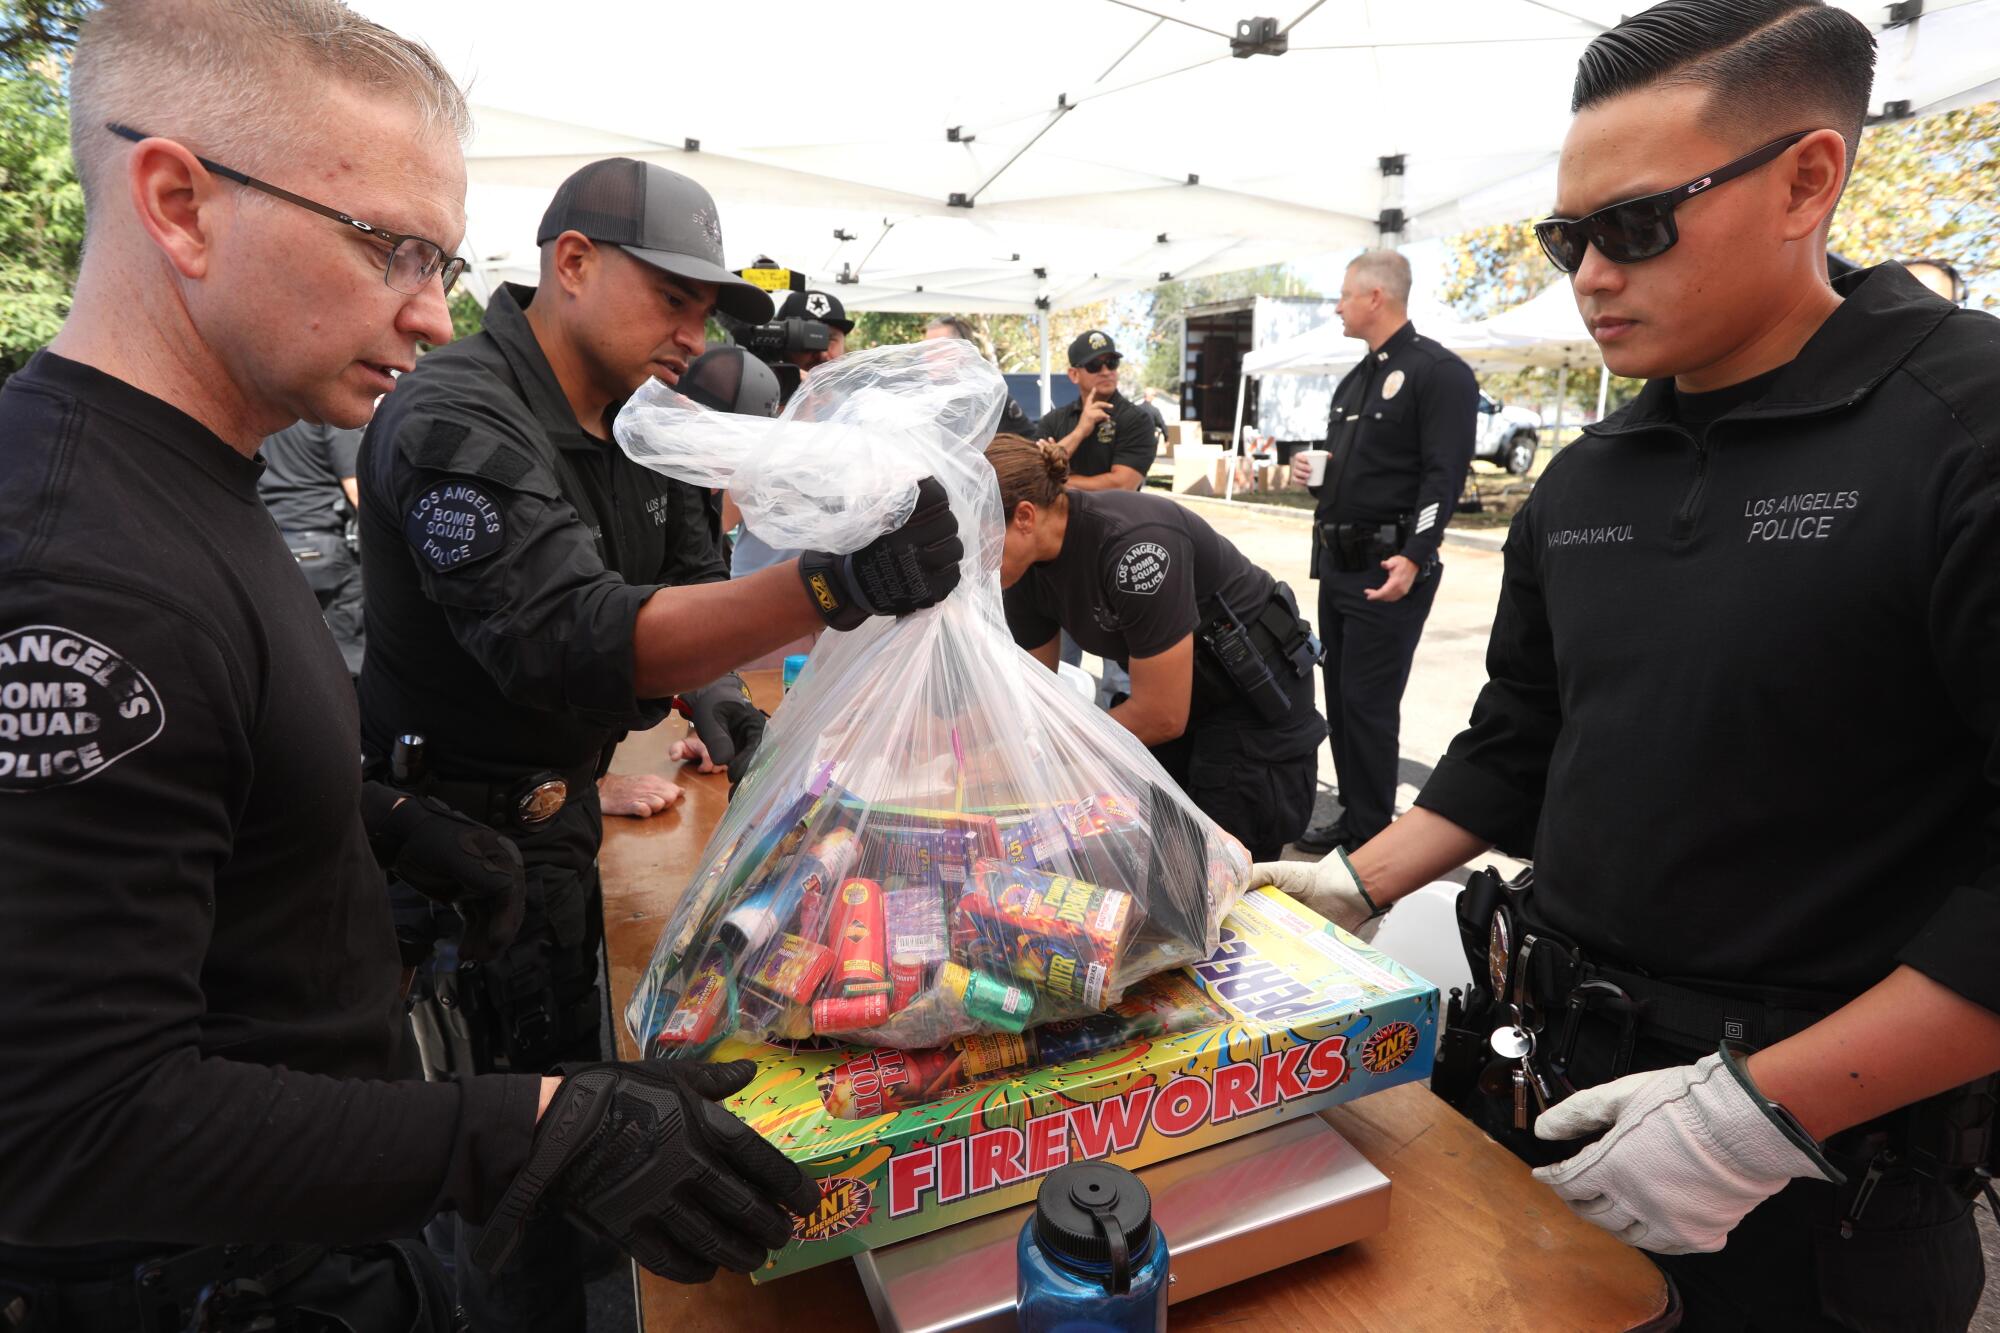 Police officers stand next to fireworks.